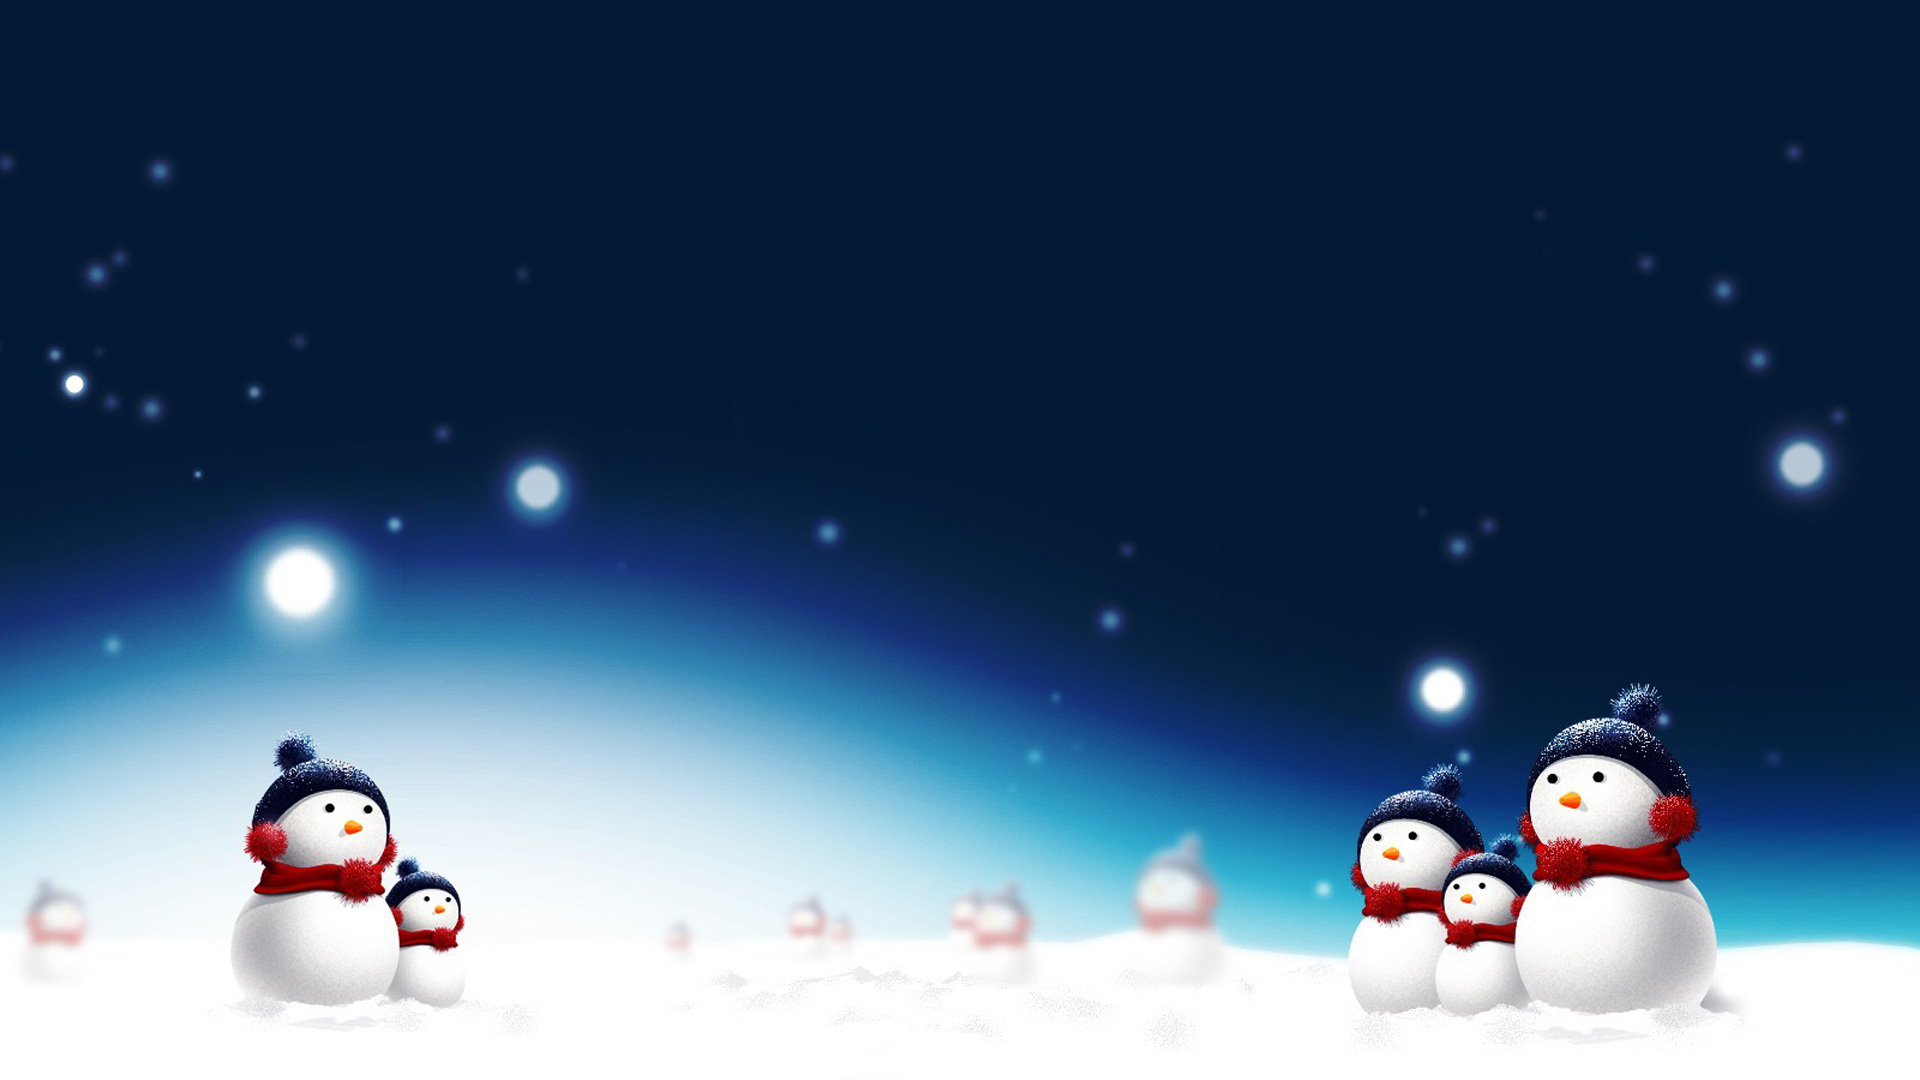 Snowman In Christmas Night Back To Wallpaper Home